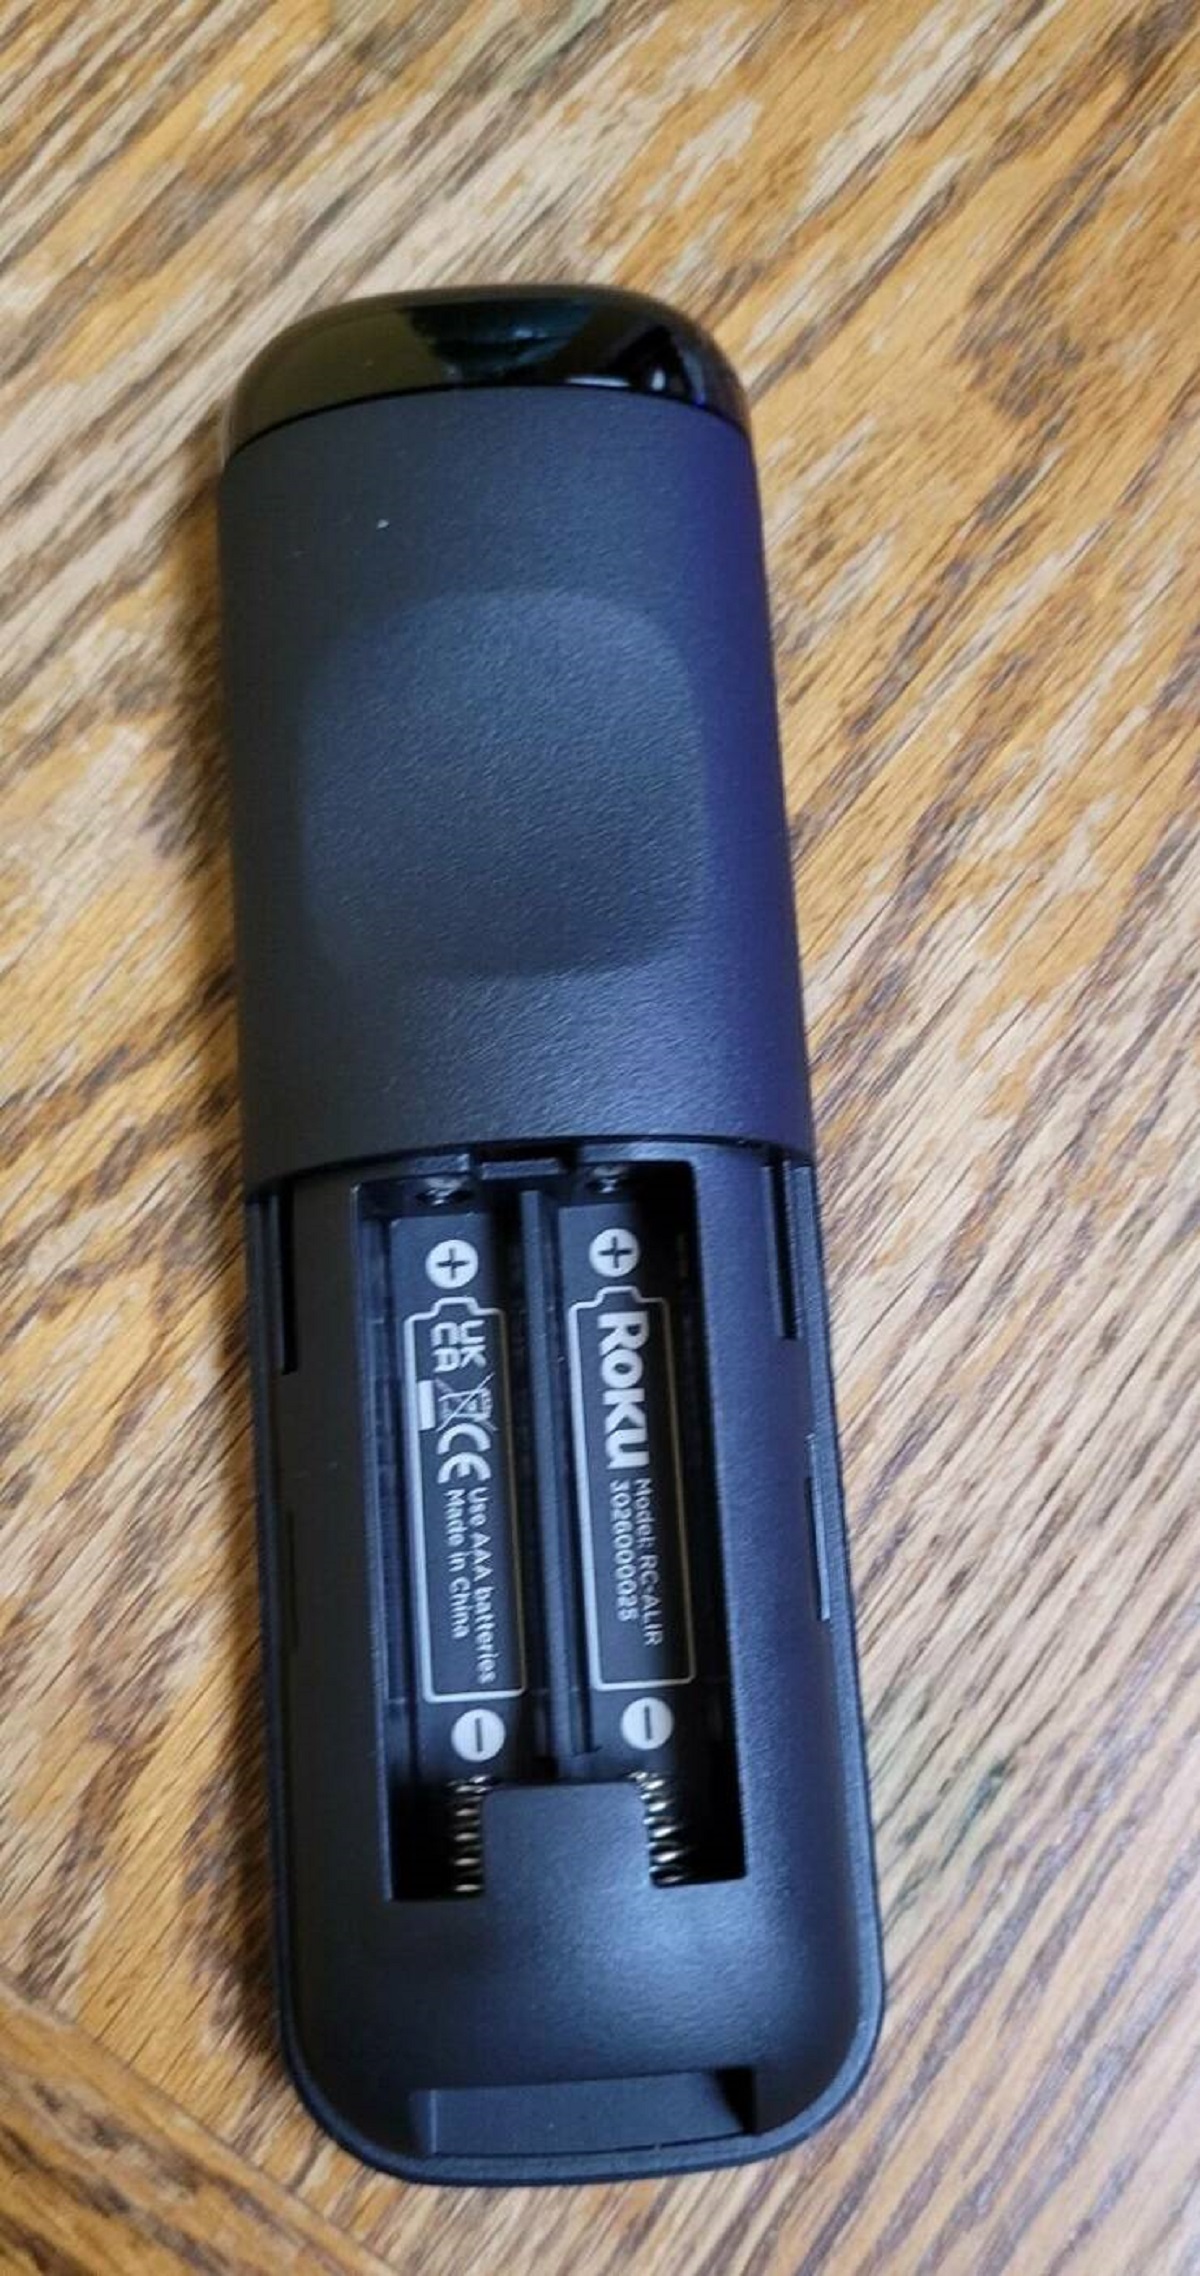 "The batteries in my remote go the same direction"